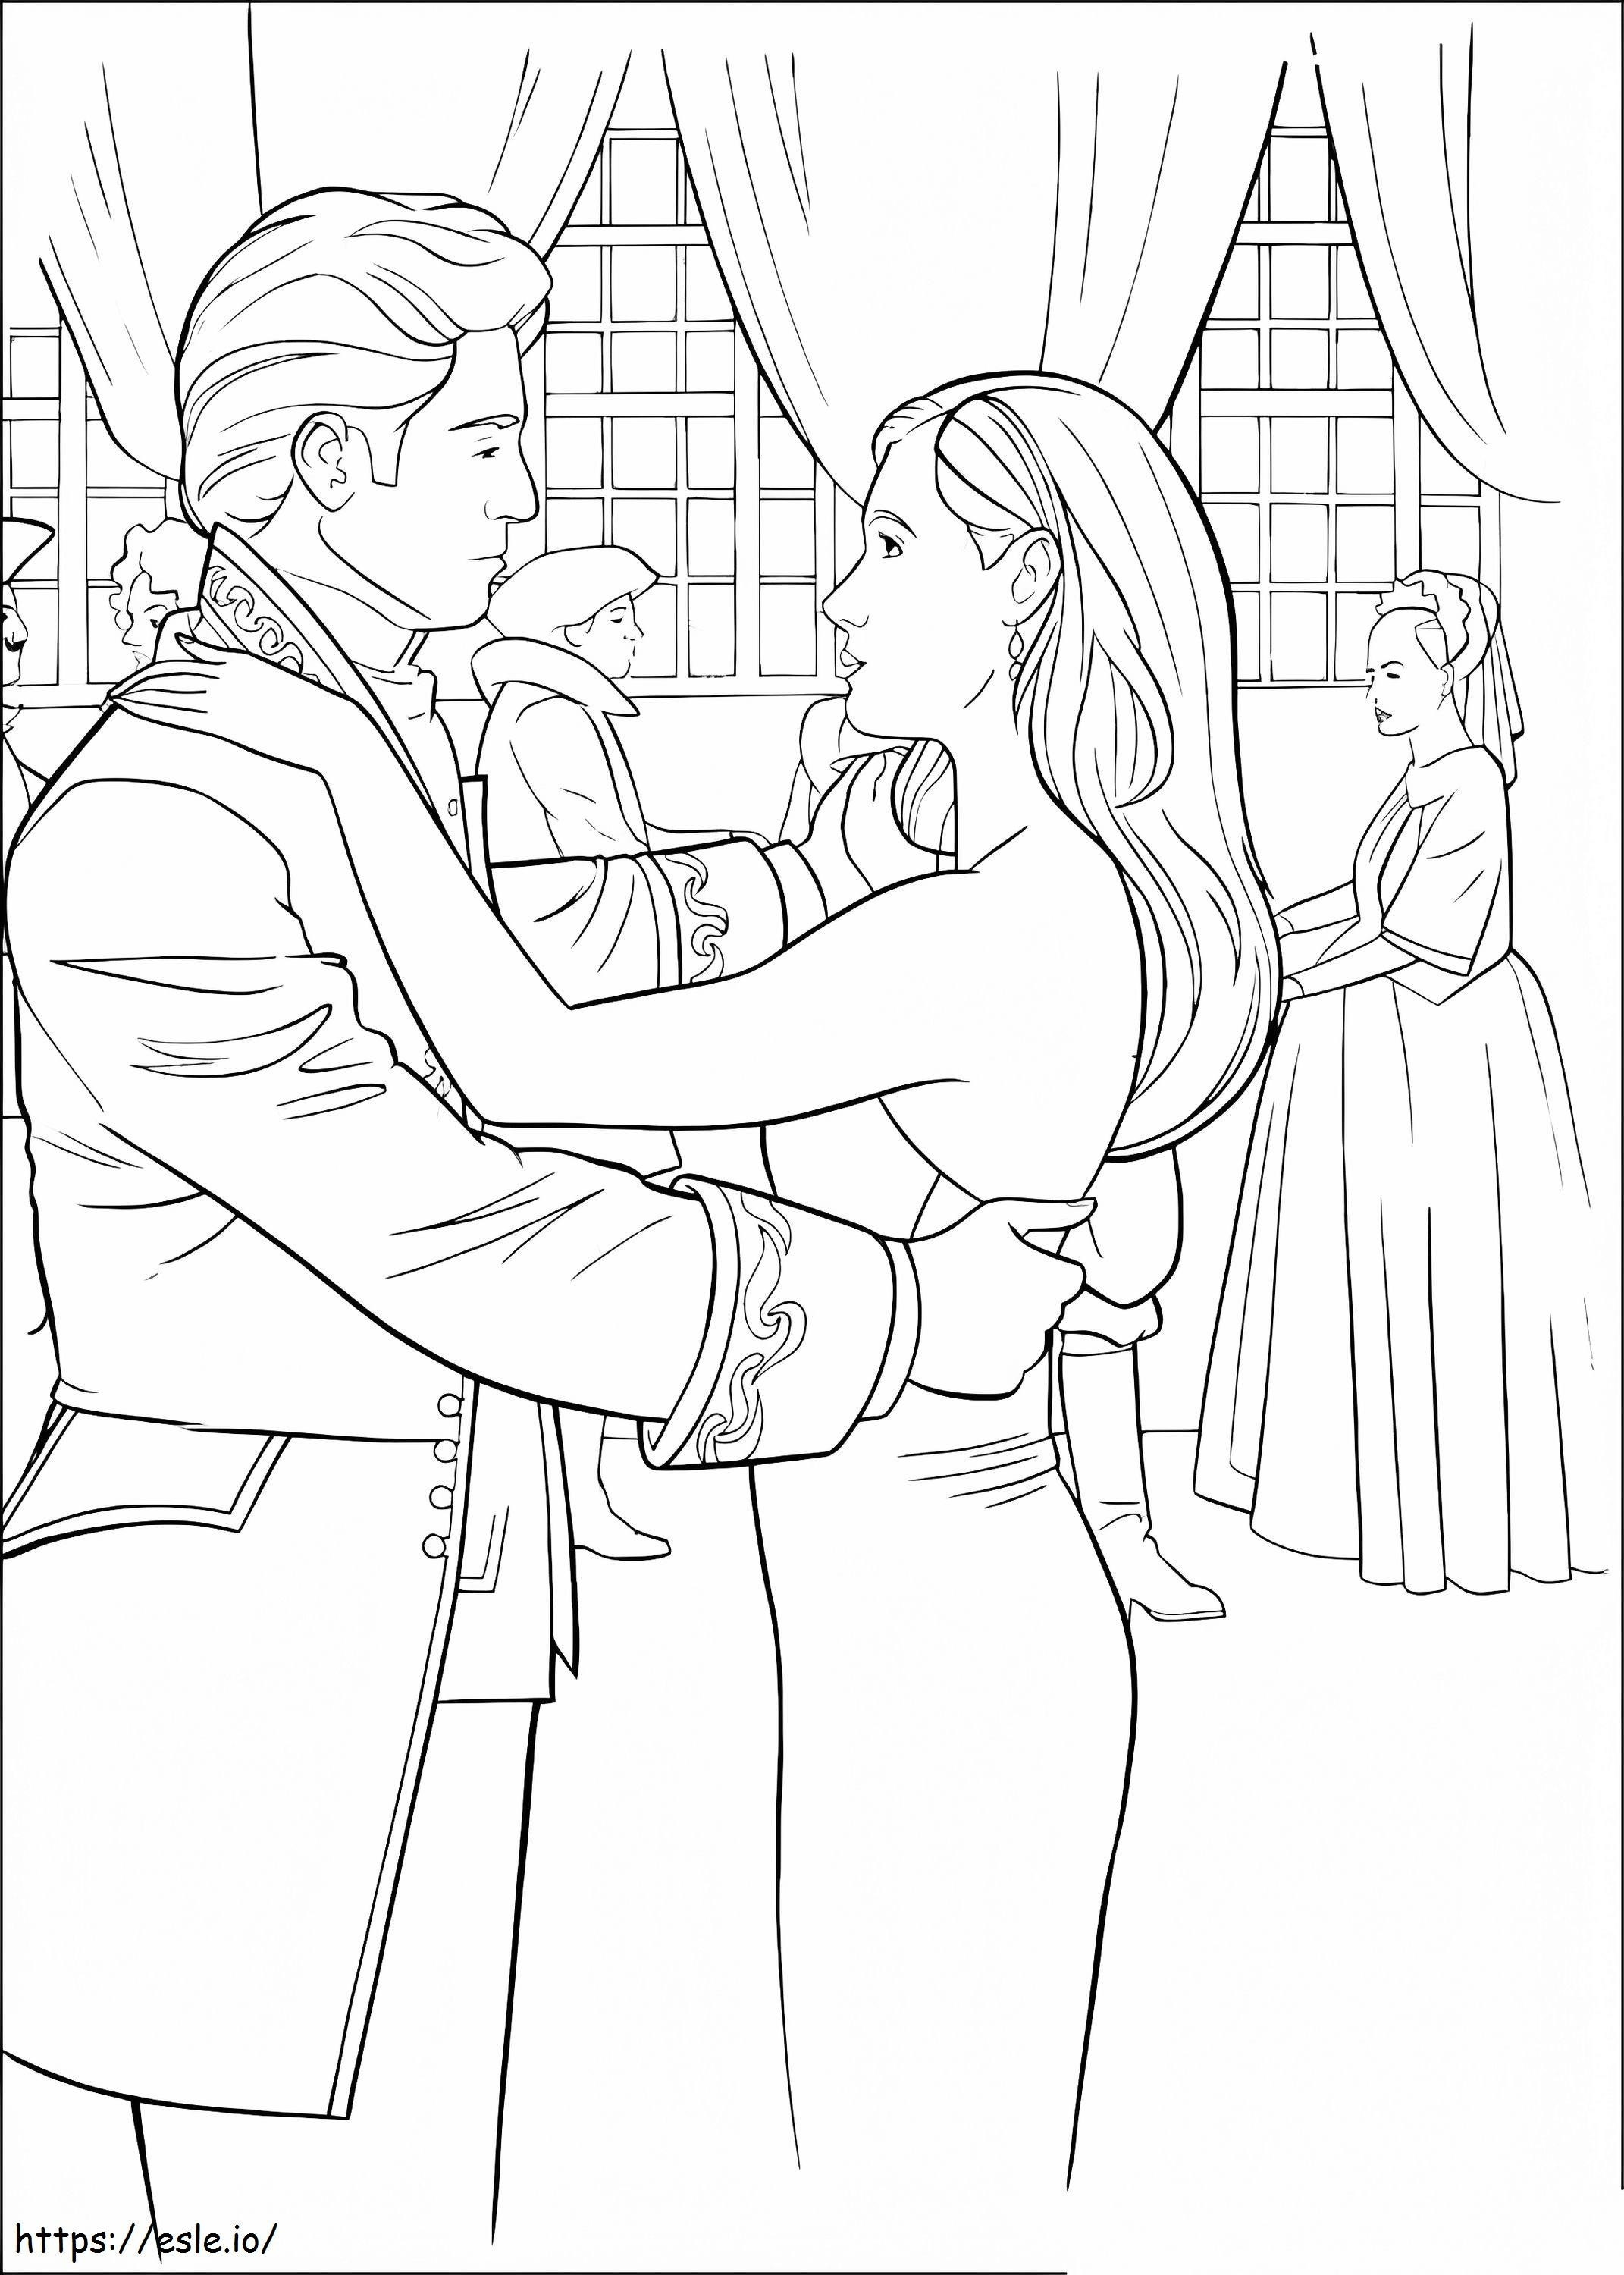 Princess Giselle And The Dancing Prince coloring page